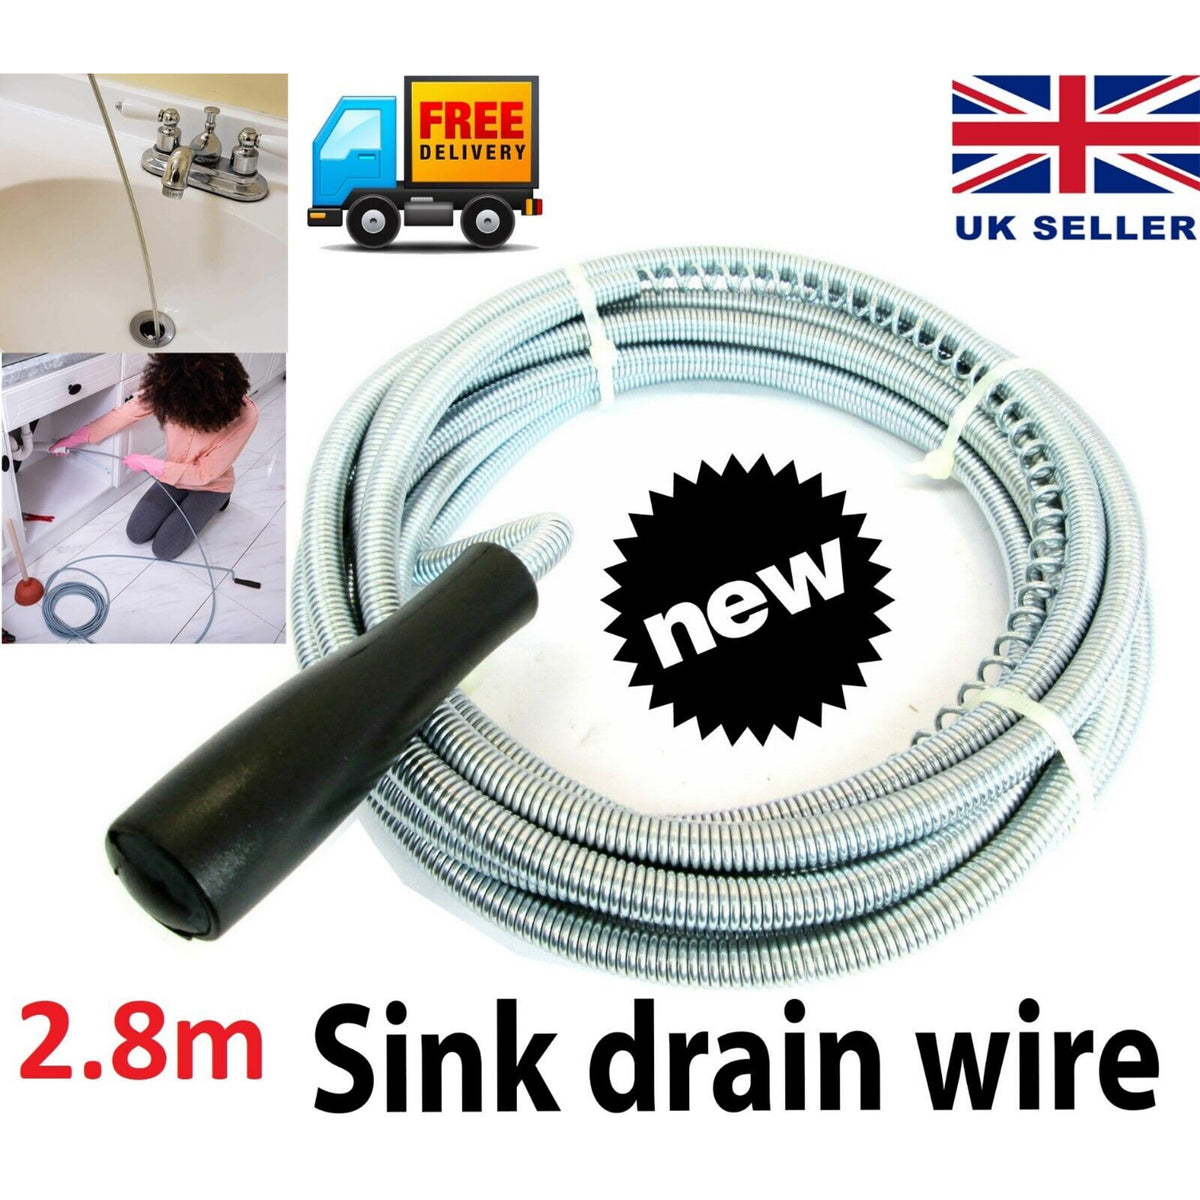 Beclen Harp 2.8M Sink & Drain Cleaner Waste Pipe Unblock Toilet Cleani